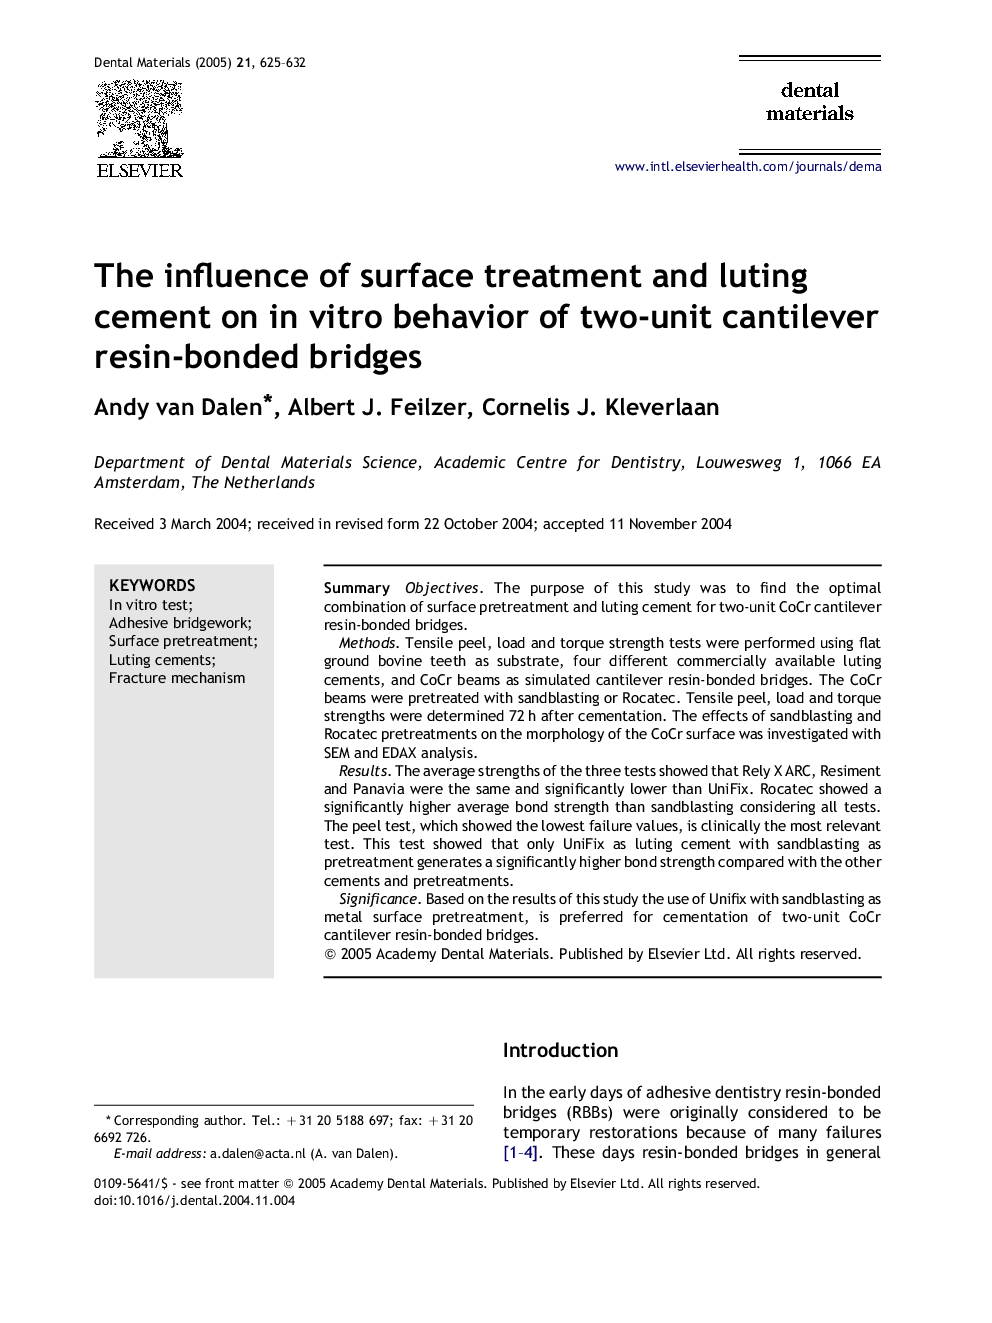 The influence of surface treatment and luting cement on in vitro behavior of two-unit cantilever resin-bonded bridges